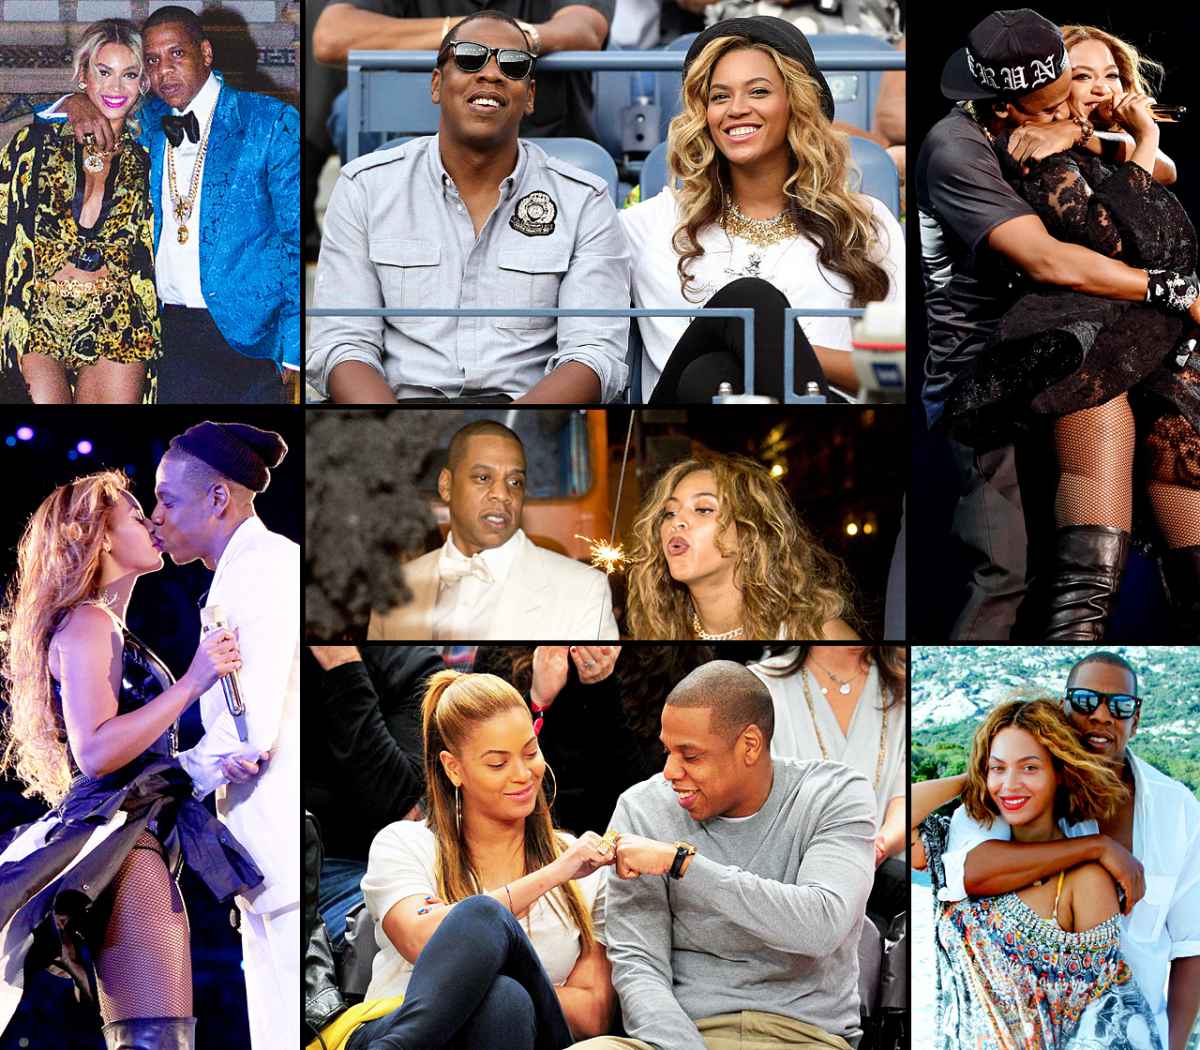 Throwback Photo of Beyoncé, Jay-Z at BET Awards Goes Viral—'Iconic